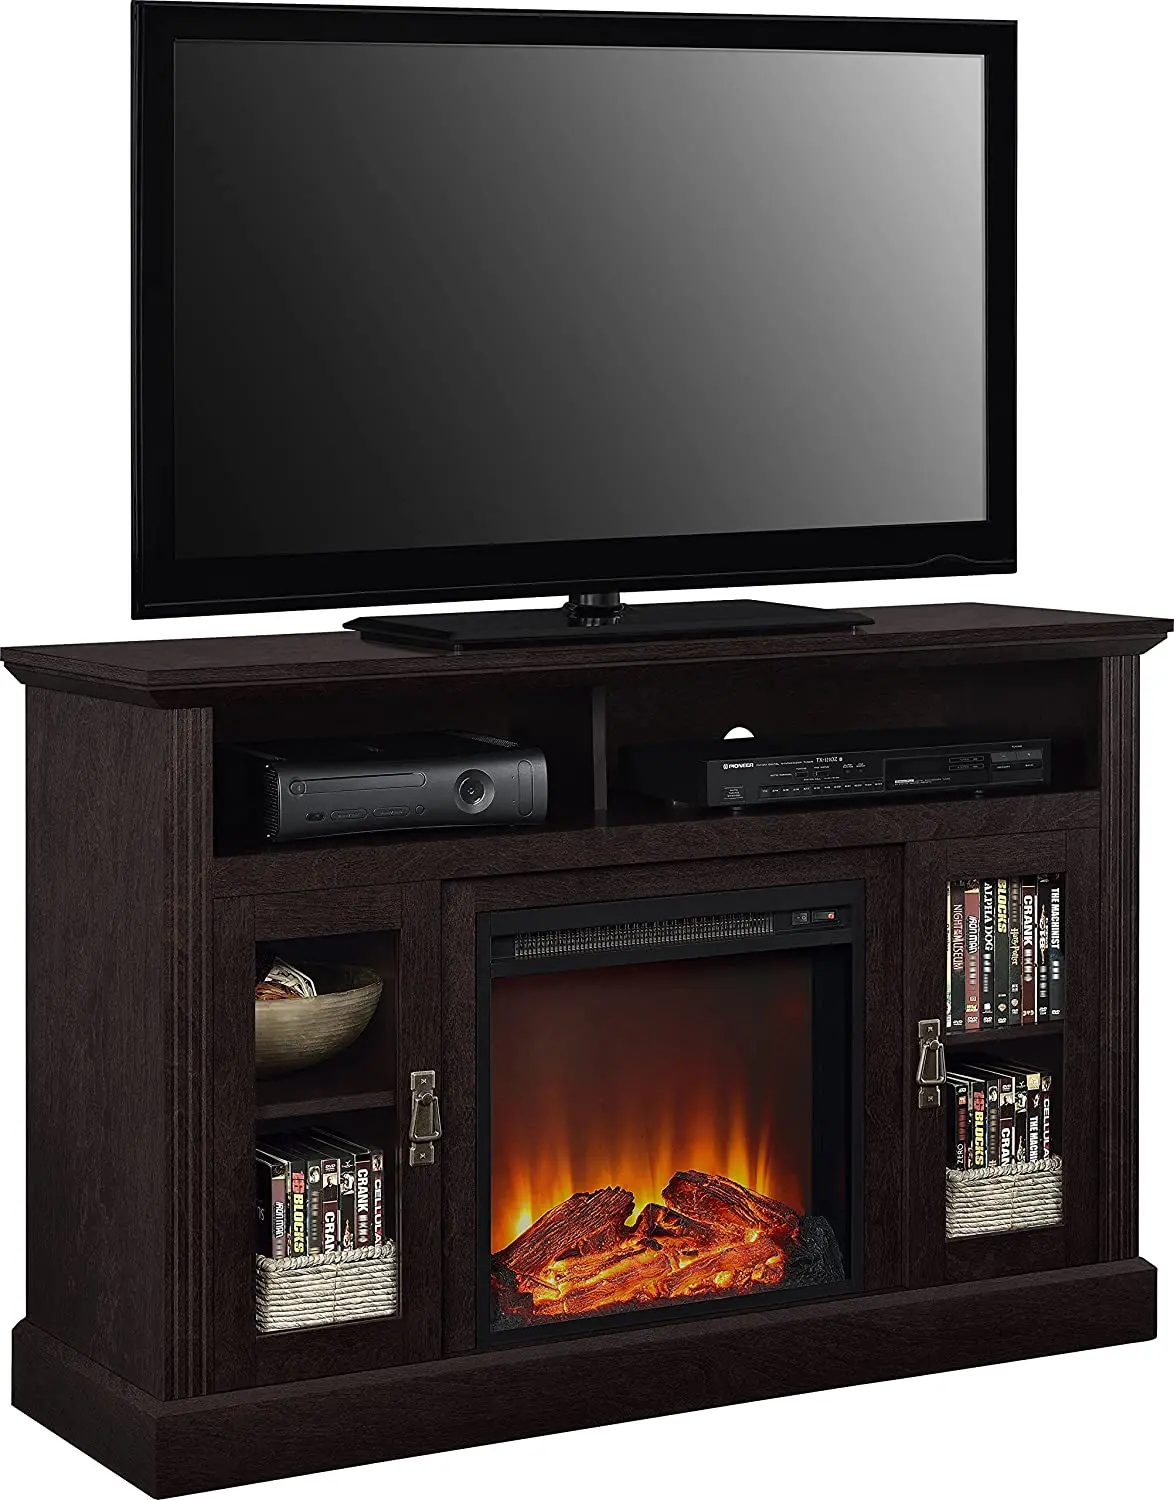 
Decor Flame Remote Control Electric Fireplace with Tv Stand entertainment center with fireplace 